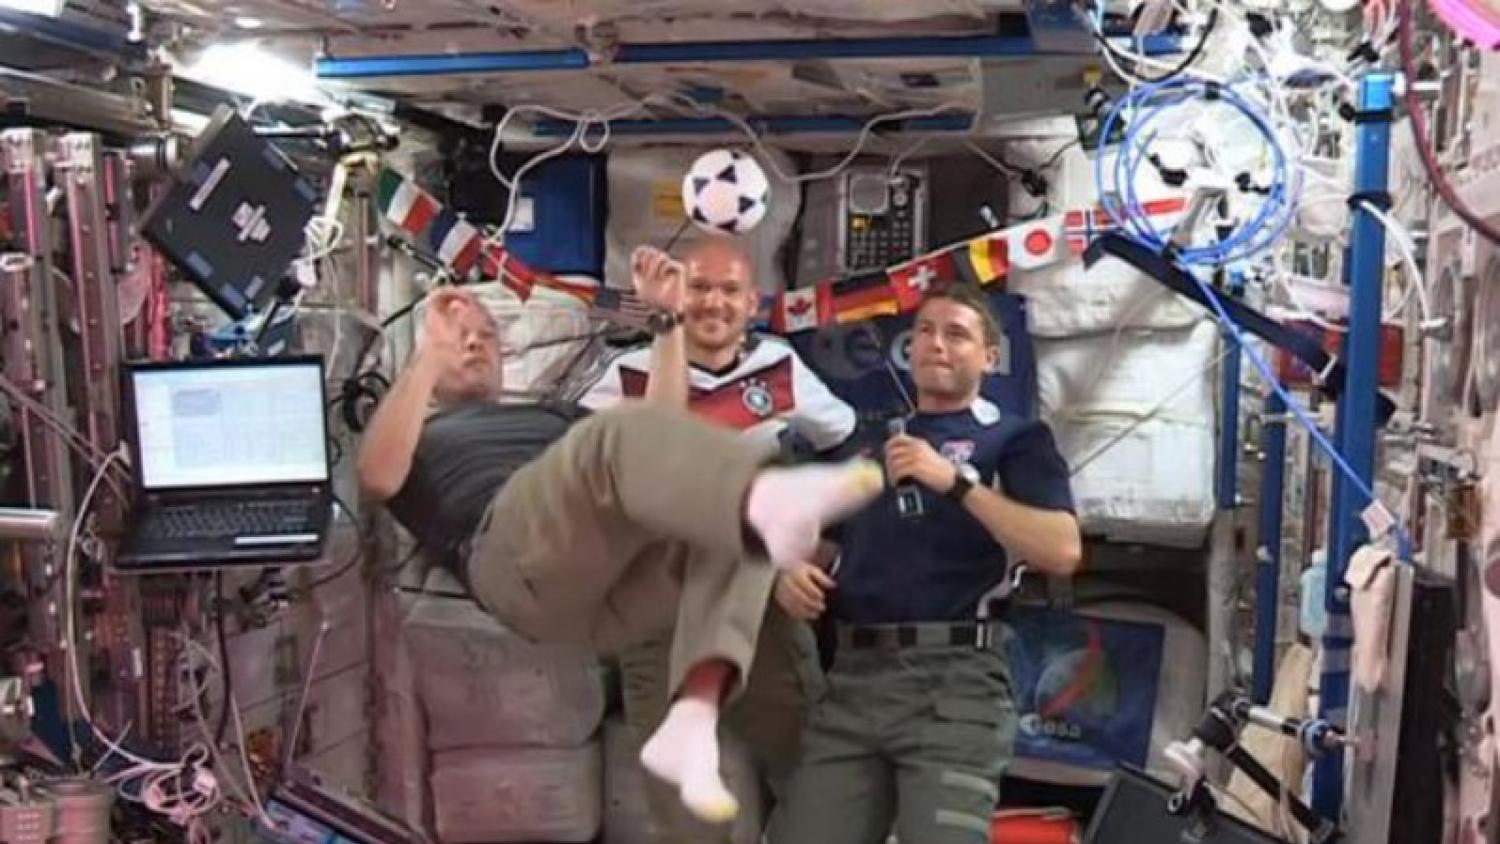 Soccer In Space (VIDEO) The18